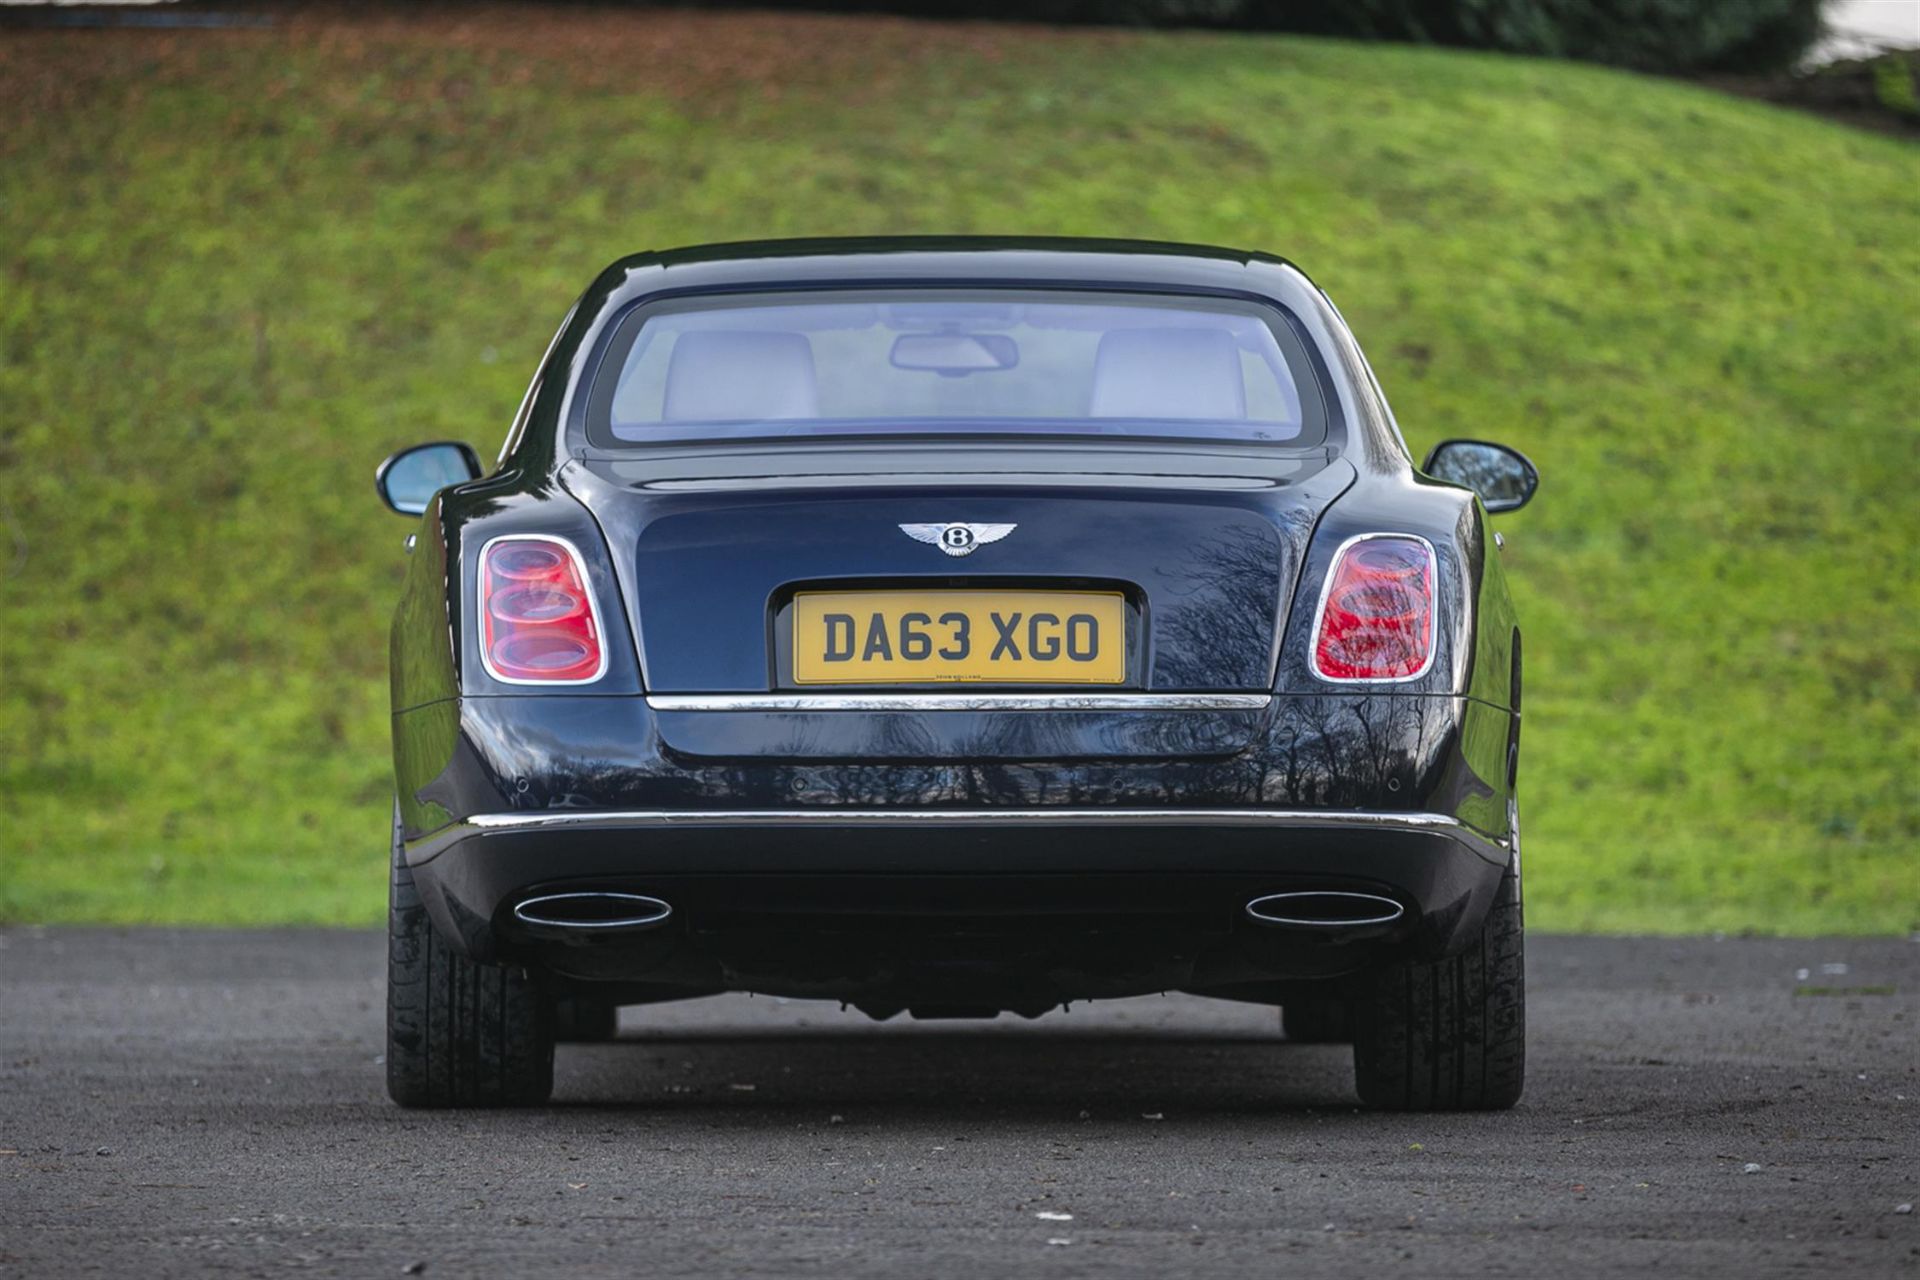 2013 Bentley Mulsanne - Former Bentley Special Ops with Royal Household Duties - Image 7 of 10